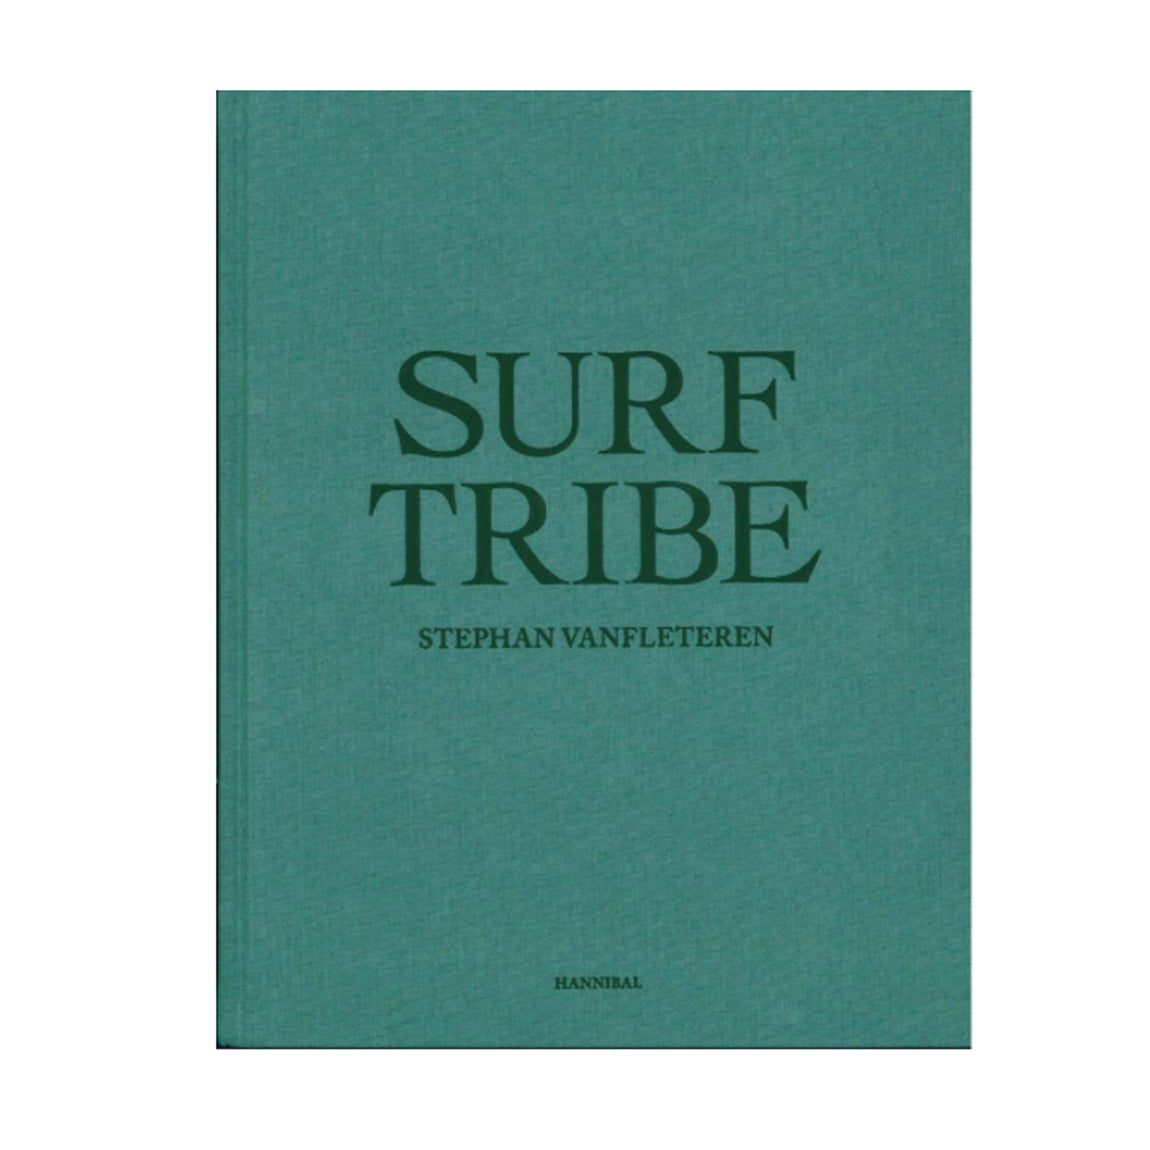 SURF TRIBE